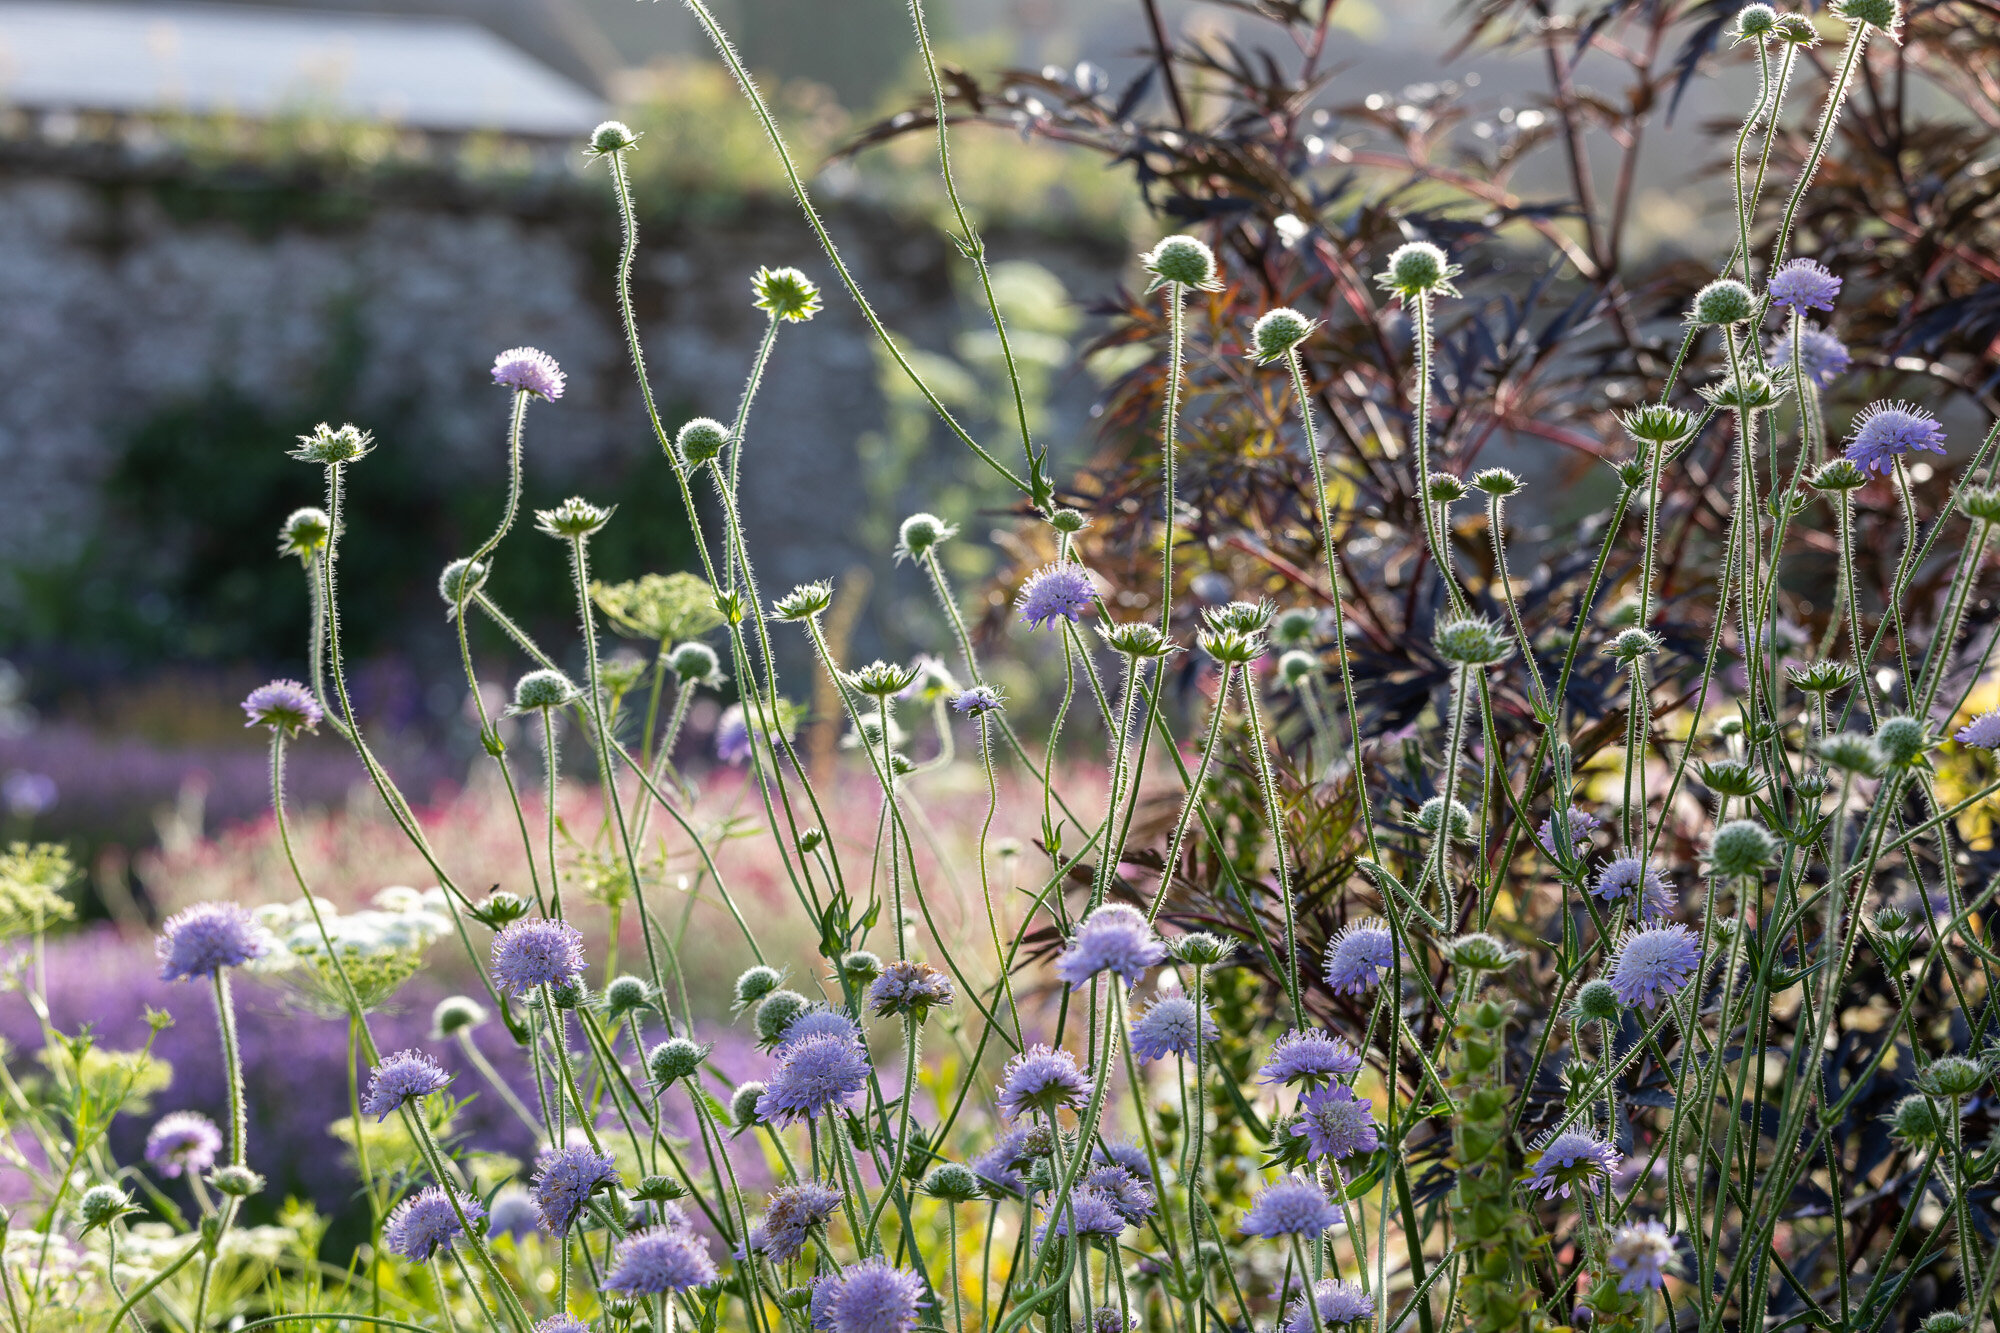 Mothecombe House Gardens, summer.  A bee filled garden designed with nature in mind